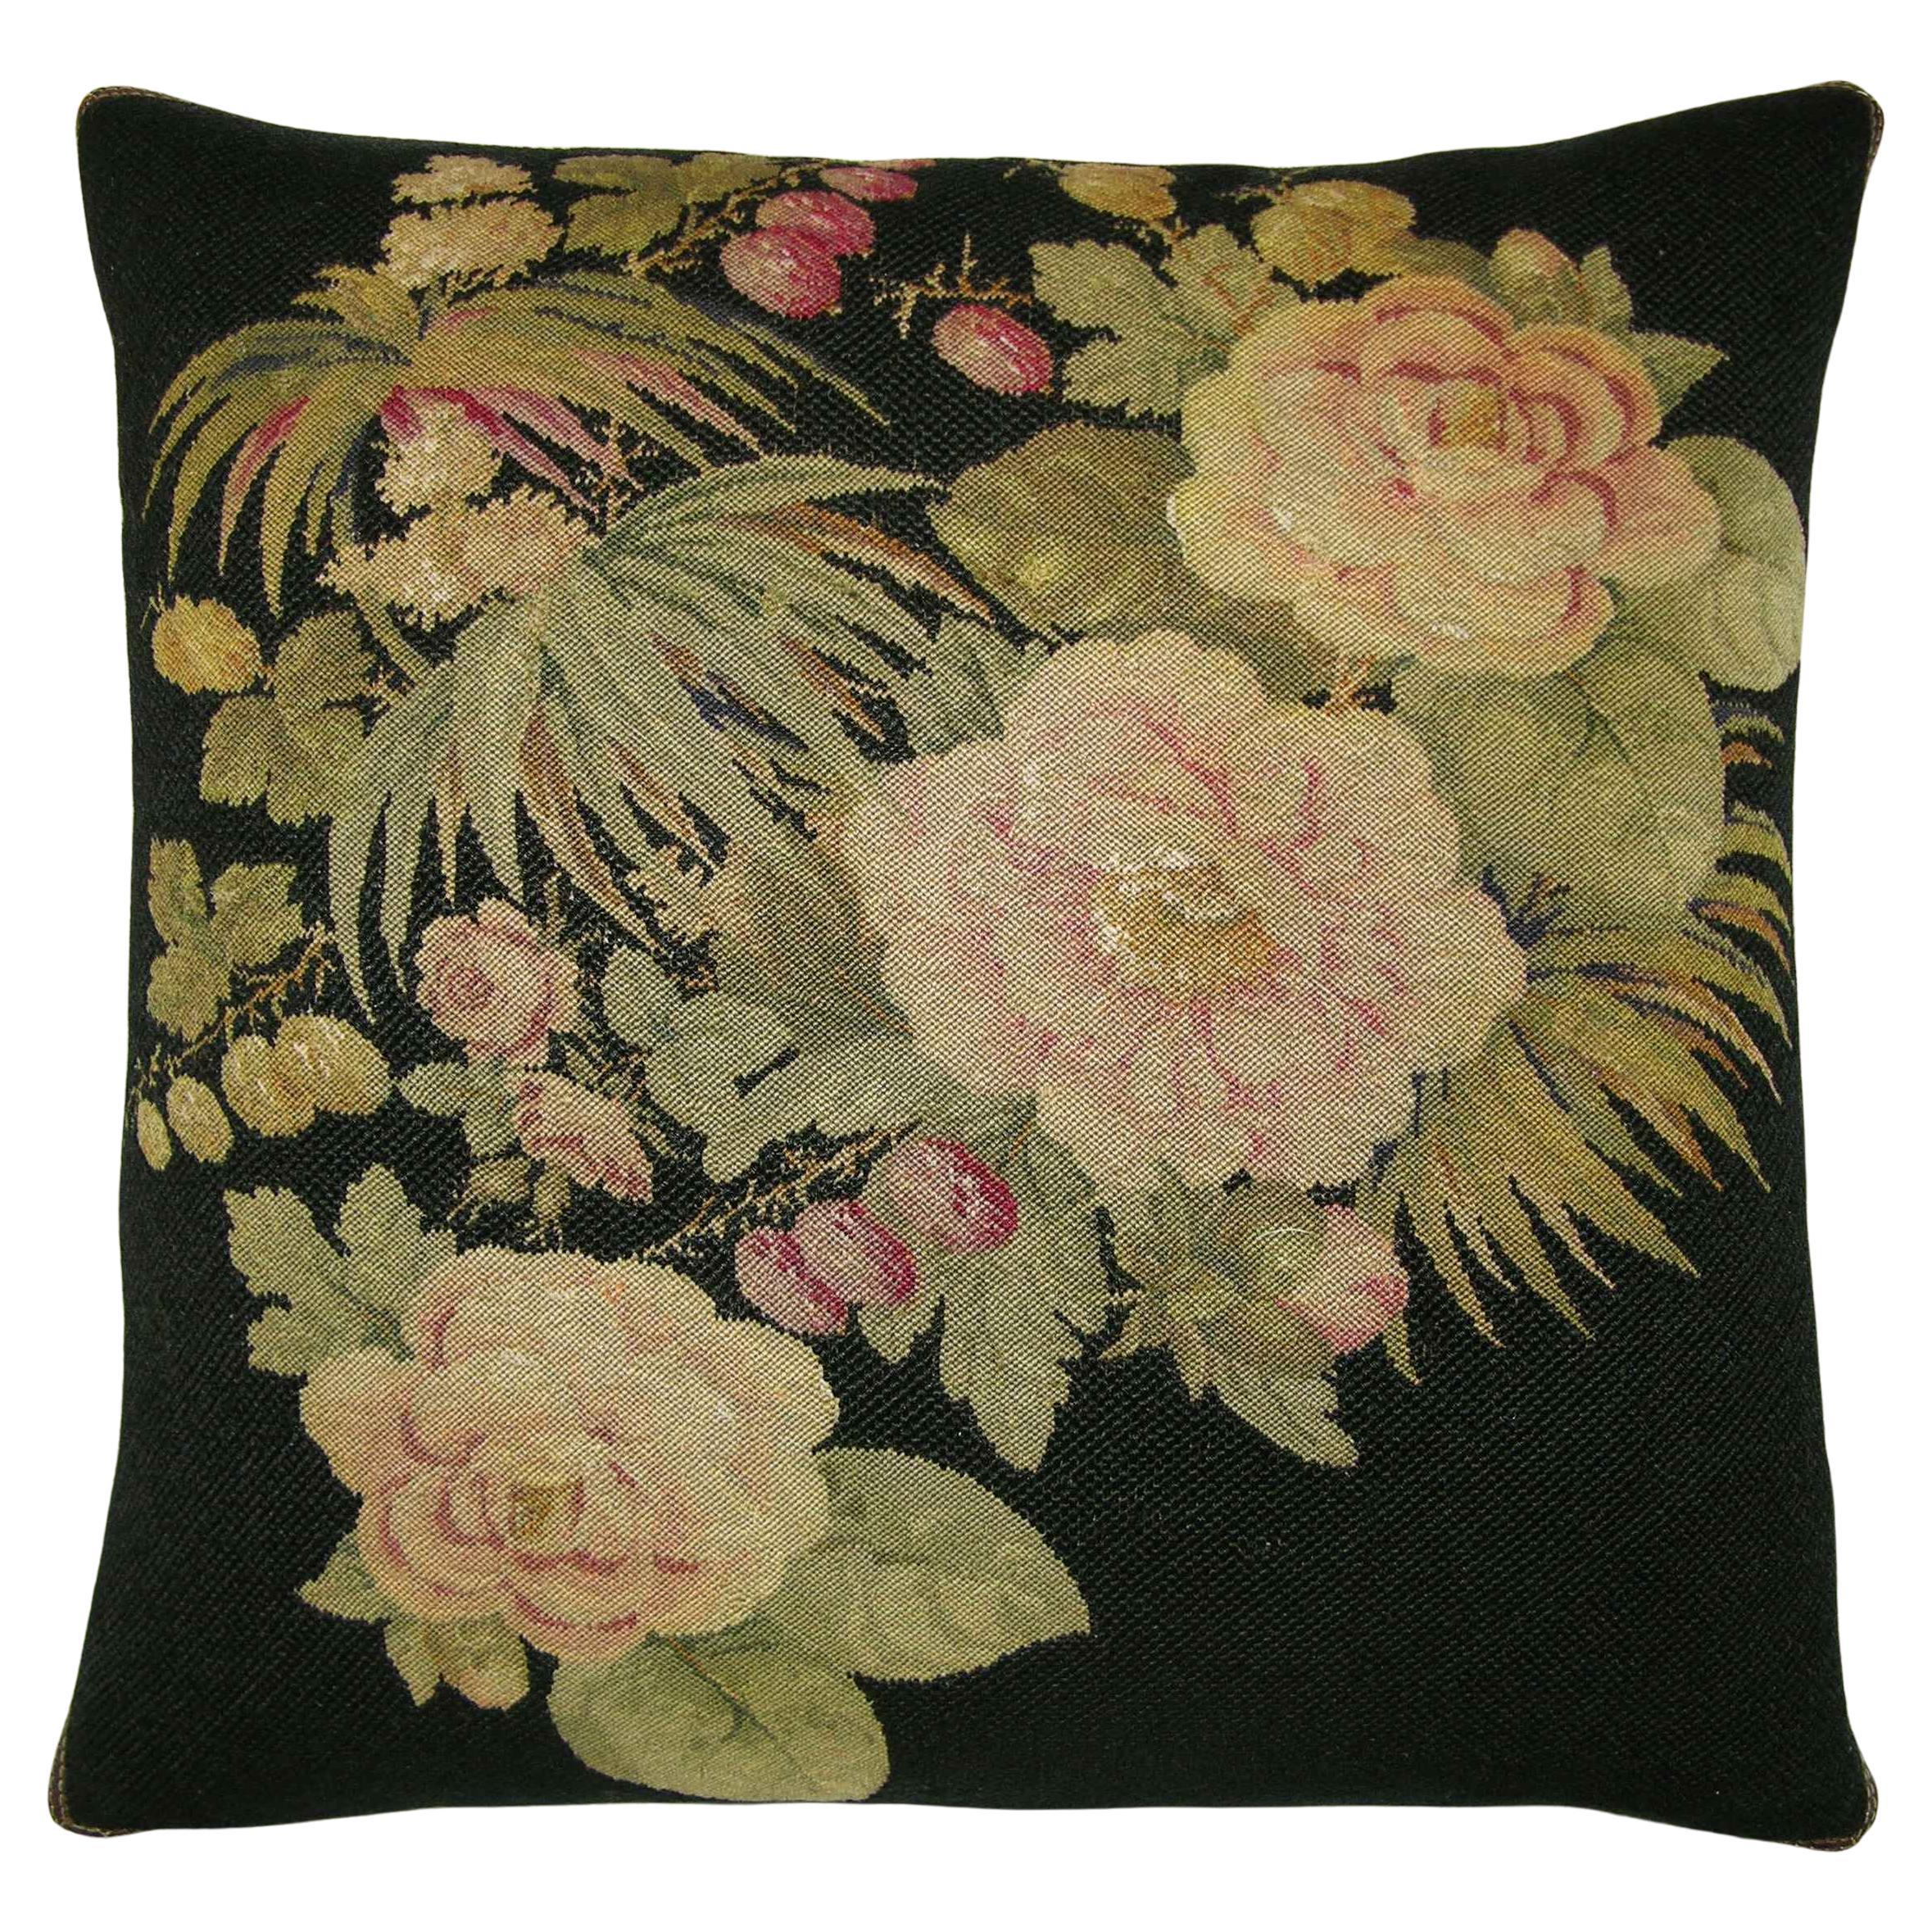 1880 Antique French Needlepoint Pillow - 19 X 18 For Sale